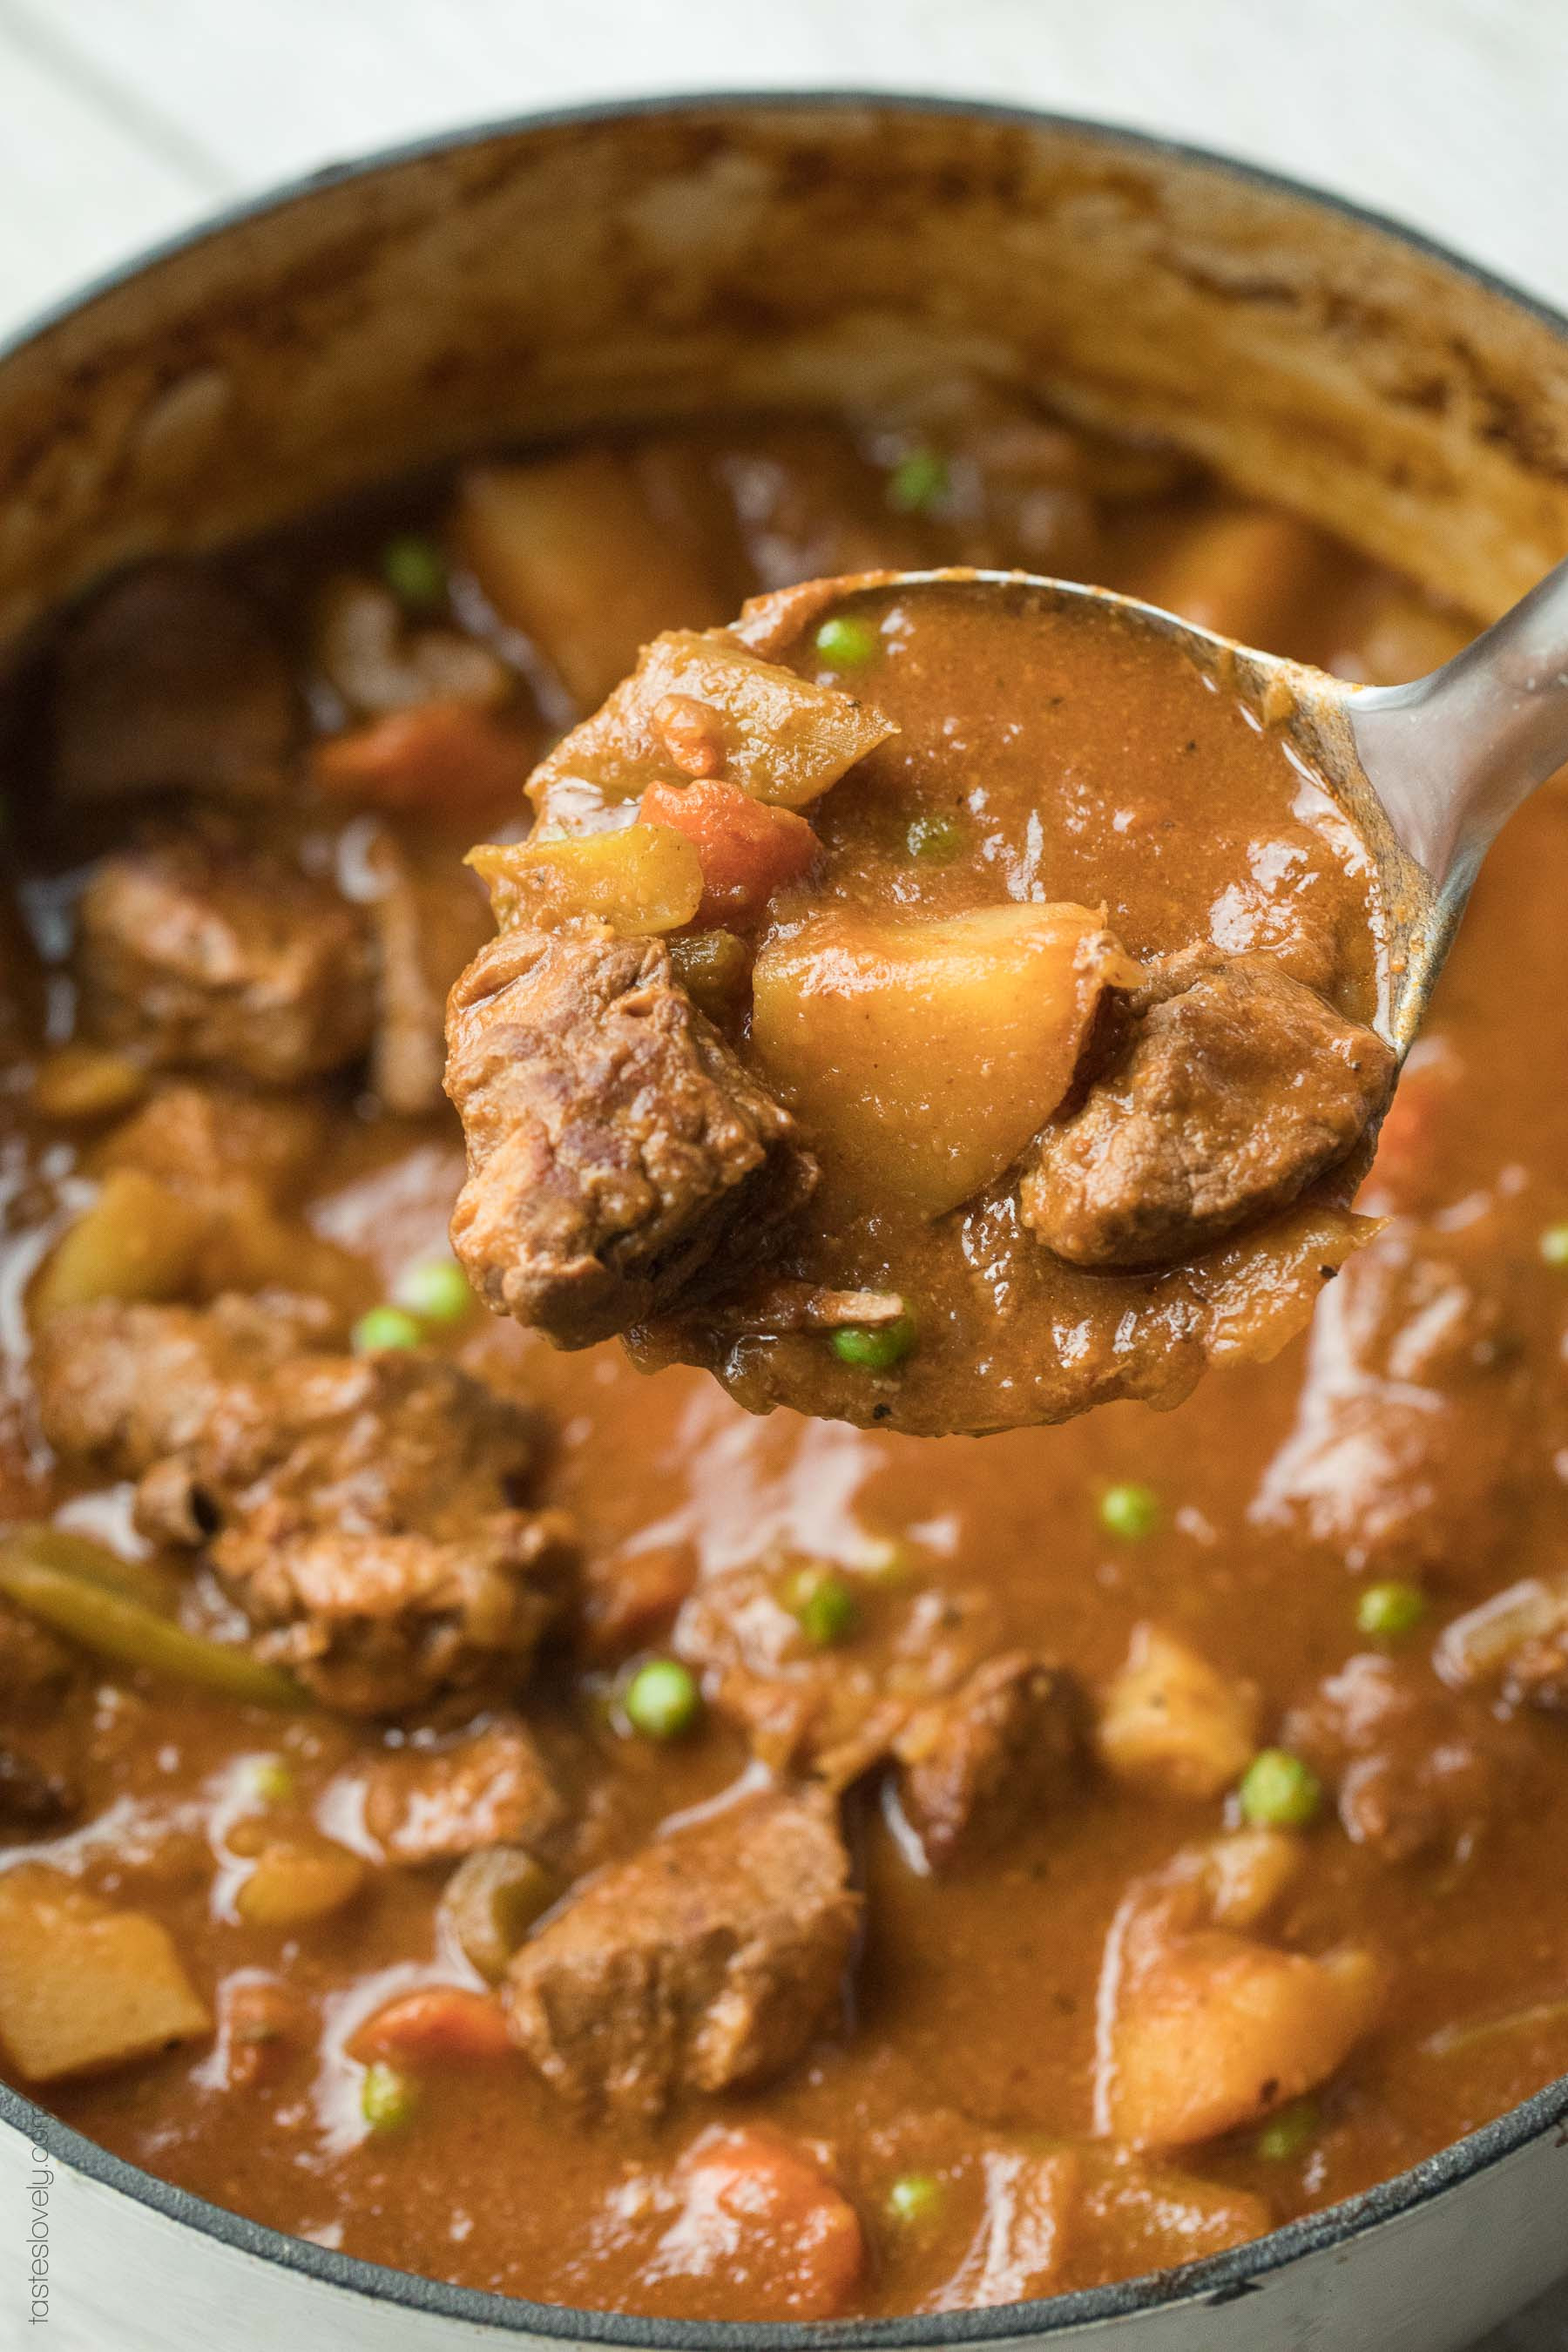 Healthy Beef Stew Recipe Slow Cooker
 Paleo Whole30 Beef Stew Instant Pot or Slow Cooker